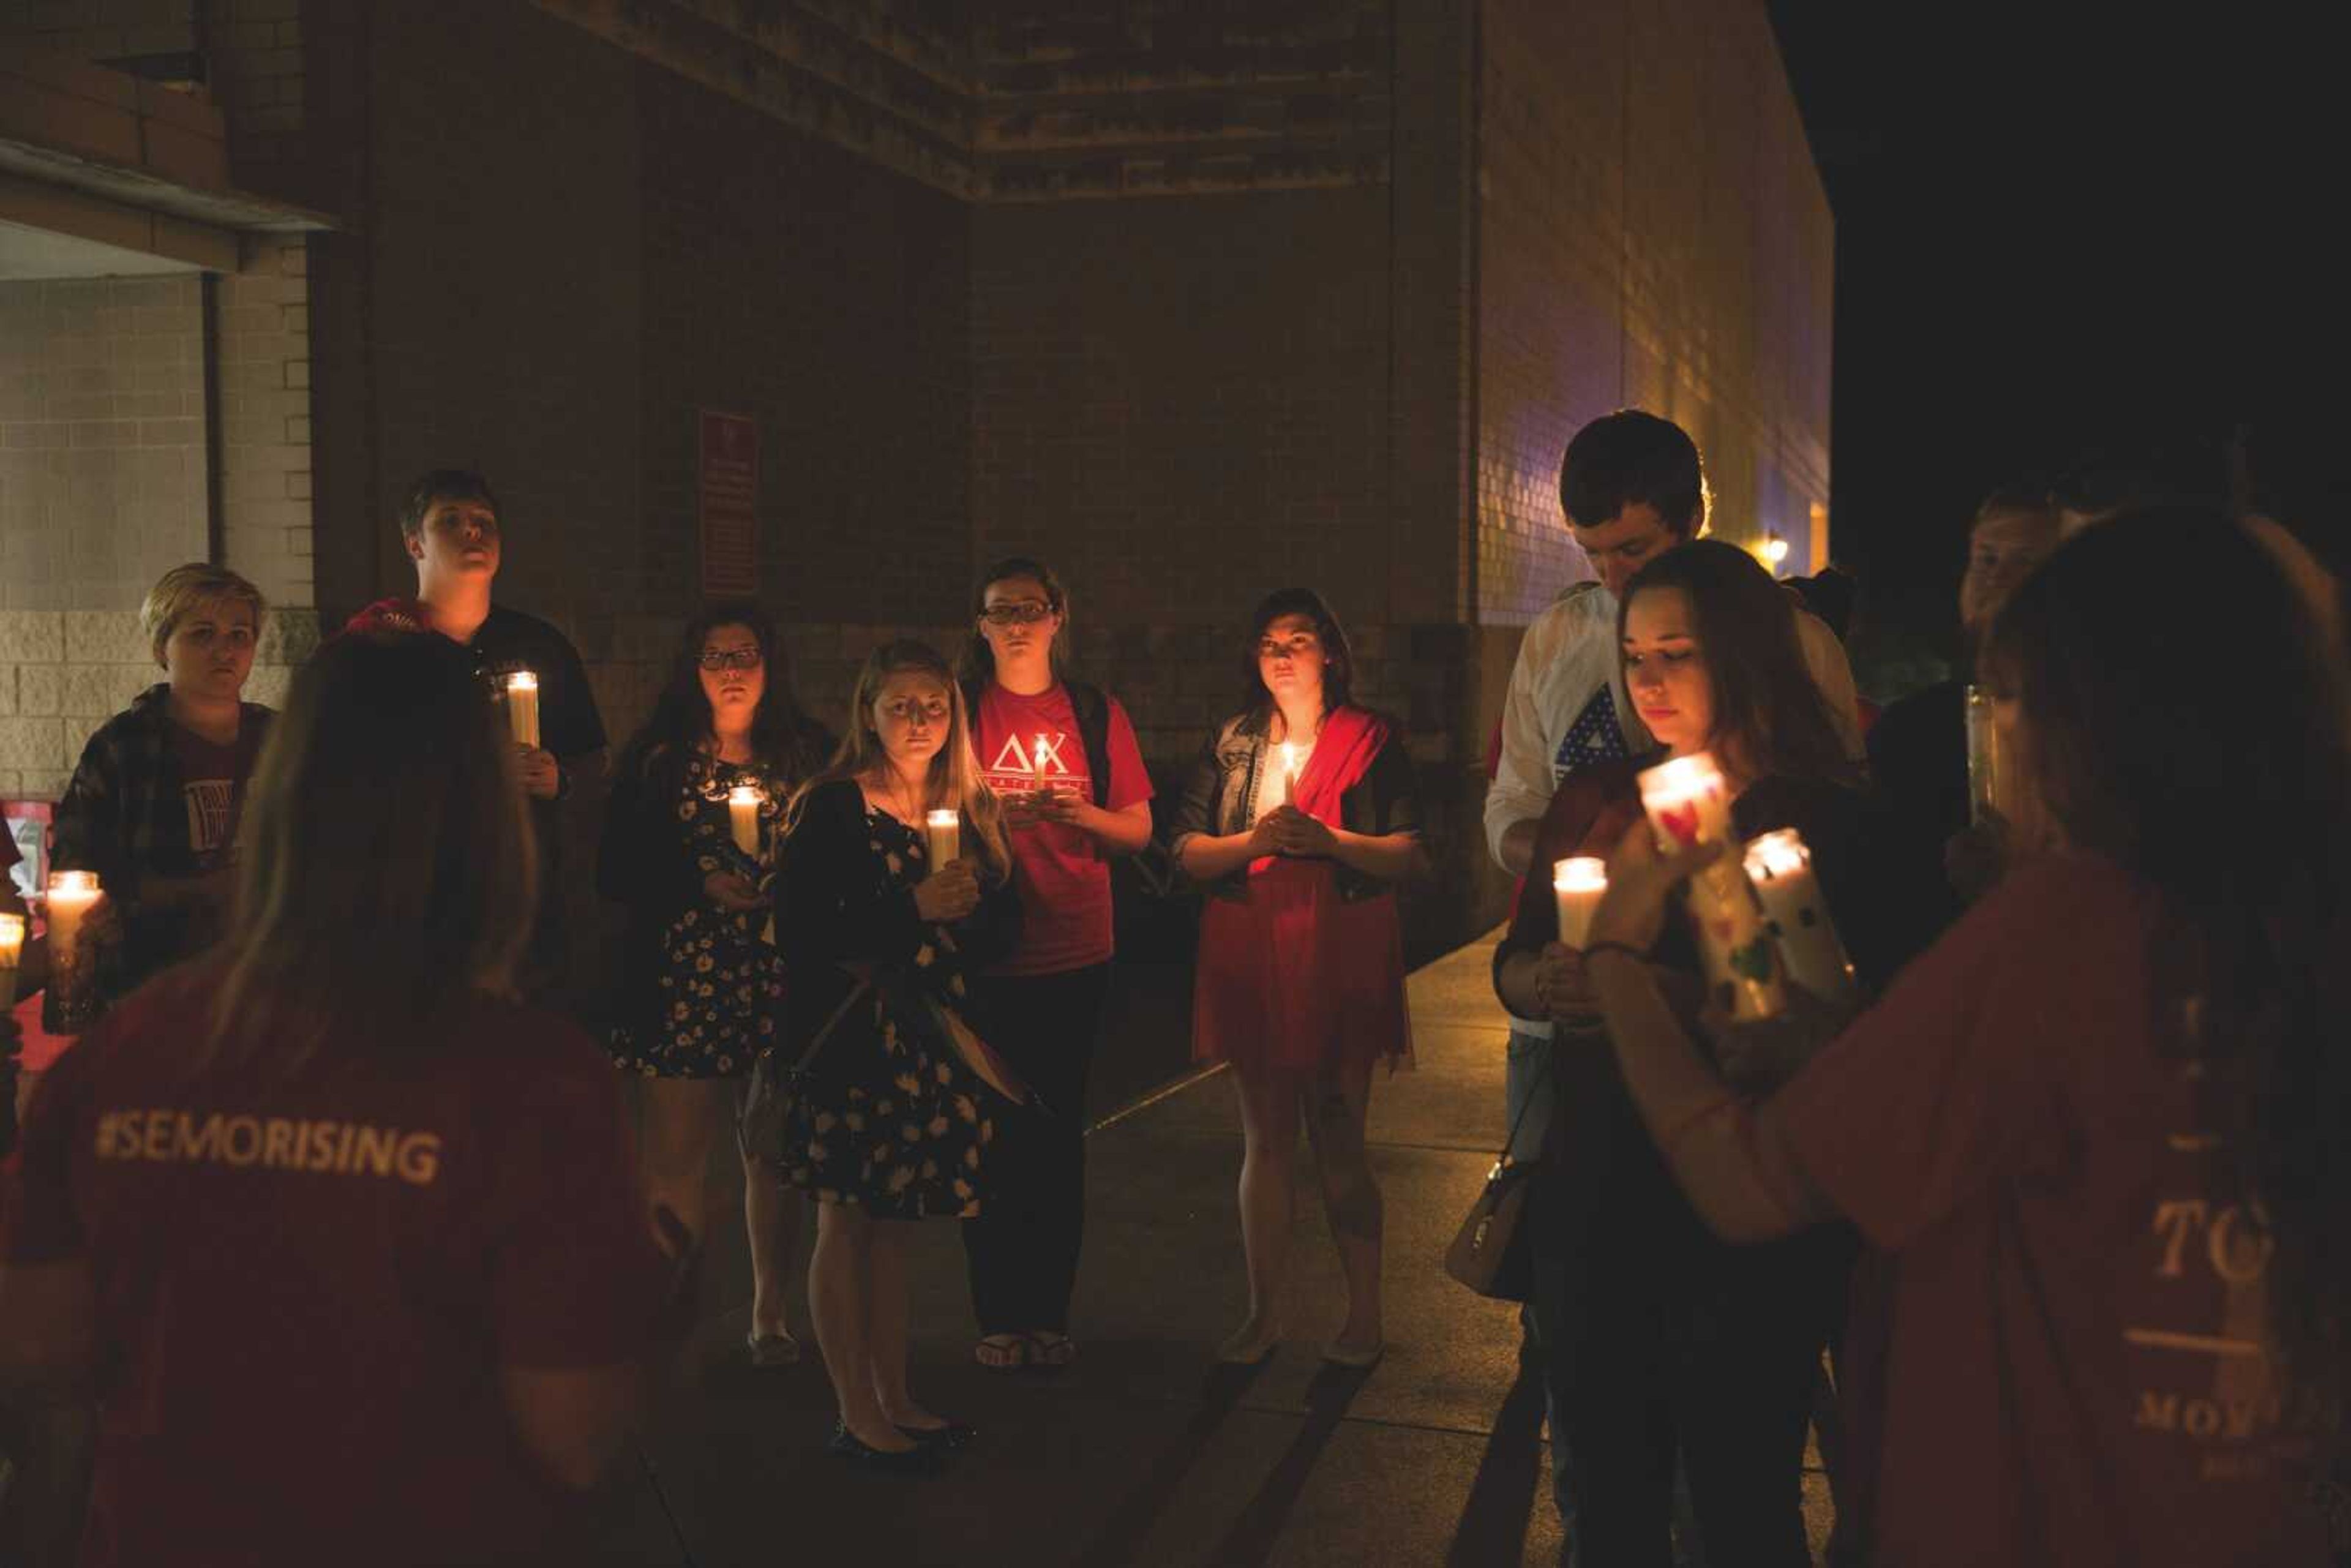 Southeast students stand together at a candlelight vigil on April 21 during SEMO Rising.